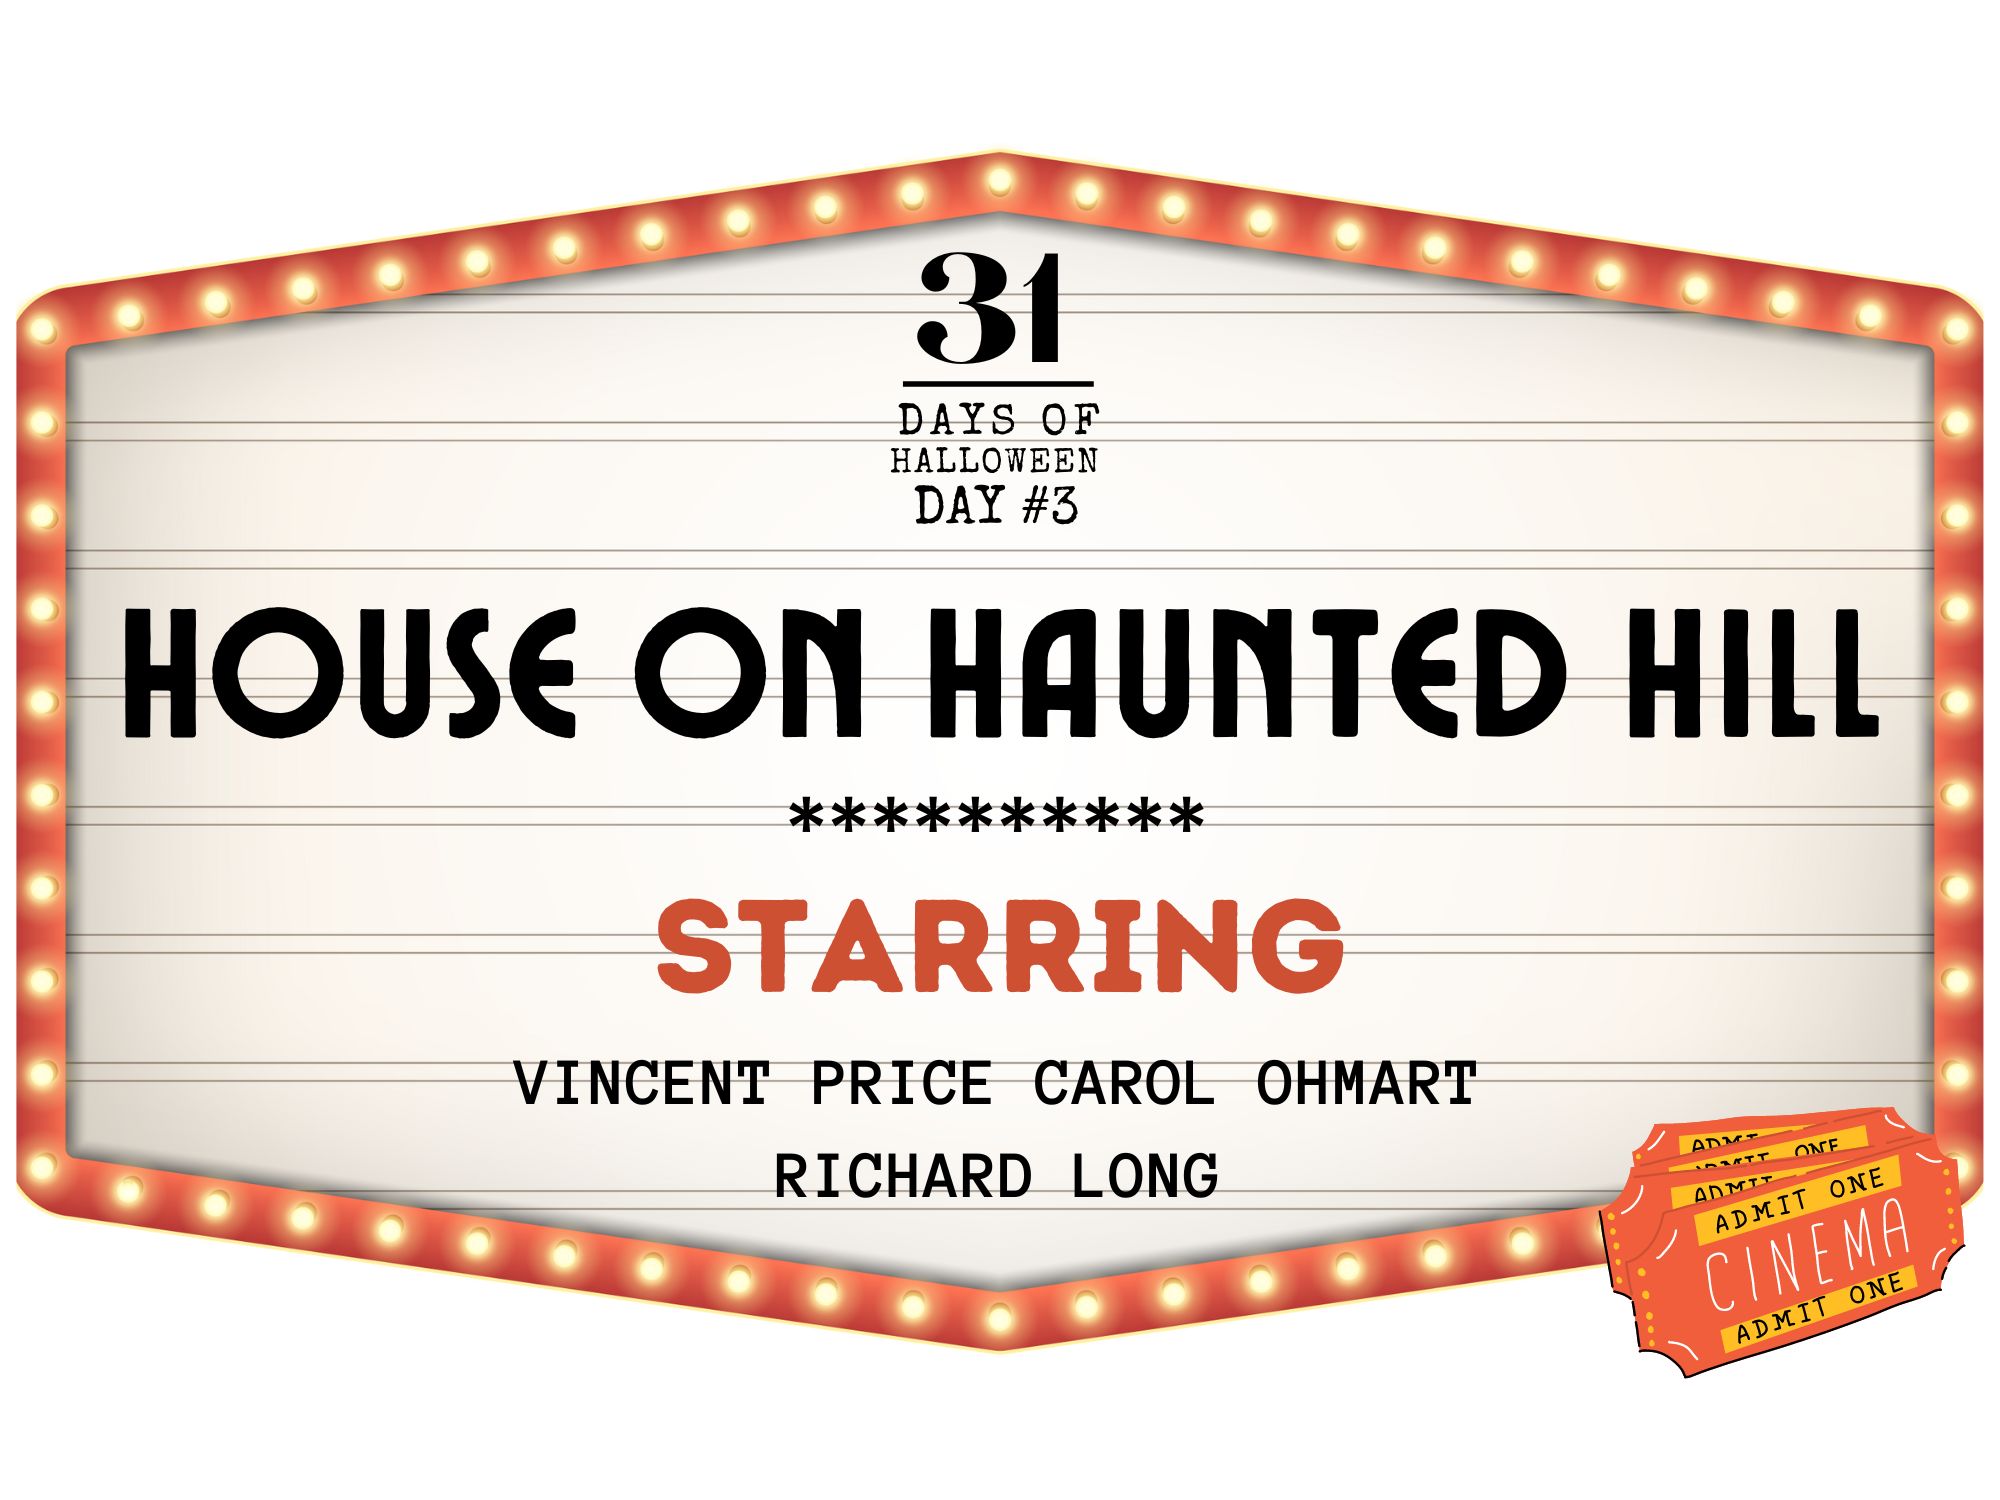 31 Days of Halloween: Day #3, House on Haunted Hill